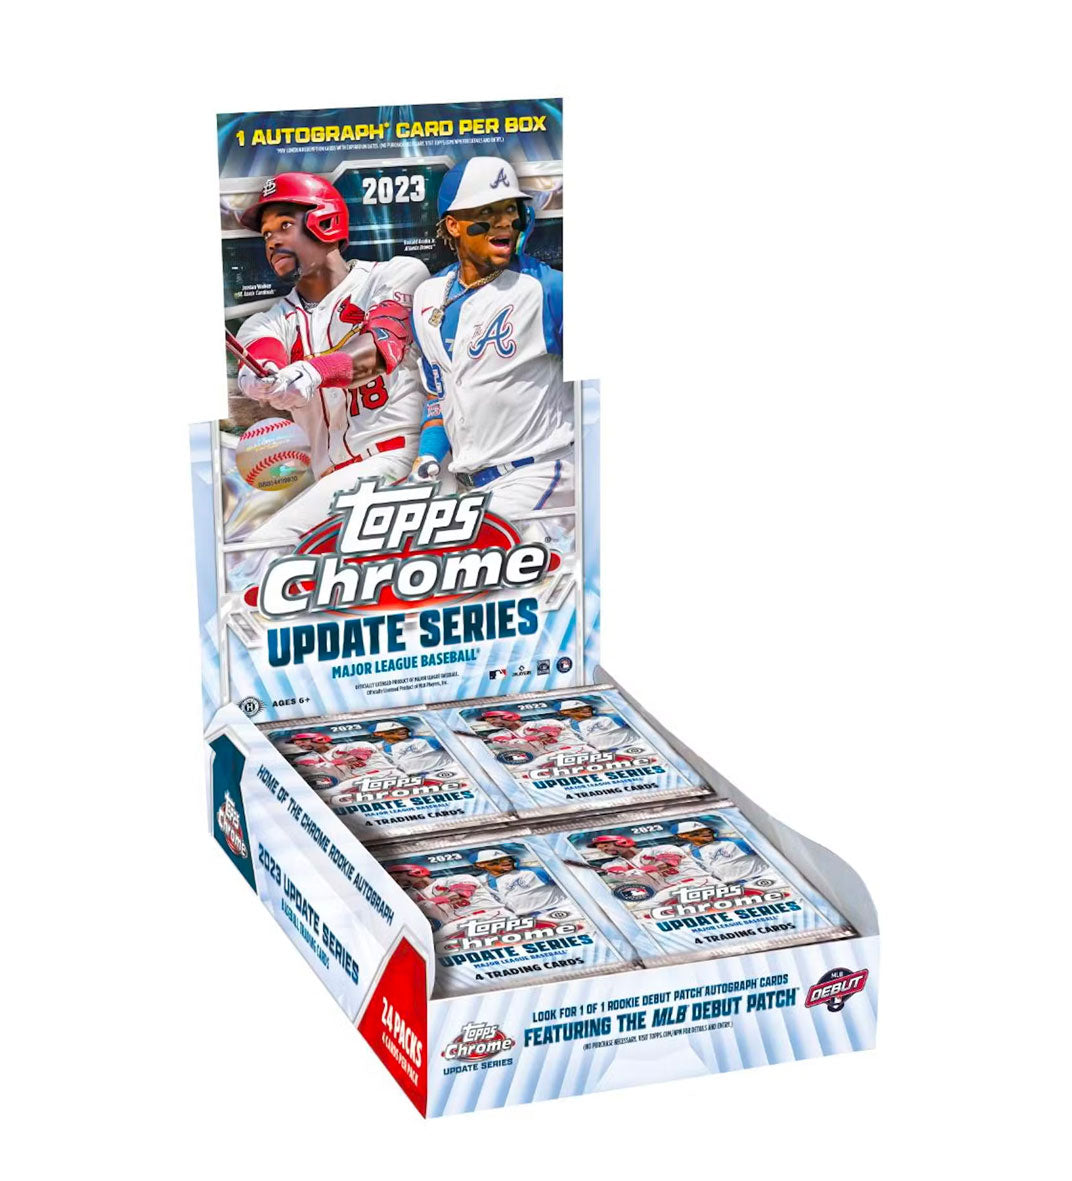 2023 Topps Chrome Update Baseball Hobby Box Ignite your baseball passion with the 2023 Topps Chrome Update Baseball Hobby Box! Each box contains 24 packs of4 cards each, including autographs and parallel cards. Get the perfect start to your collection with premium Topps base set cards featuring bold designs. Collect the stars and build your legacy!